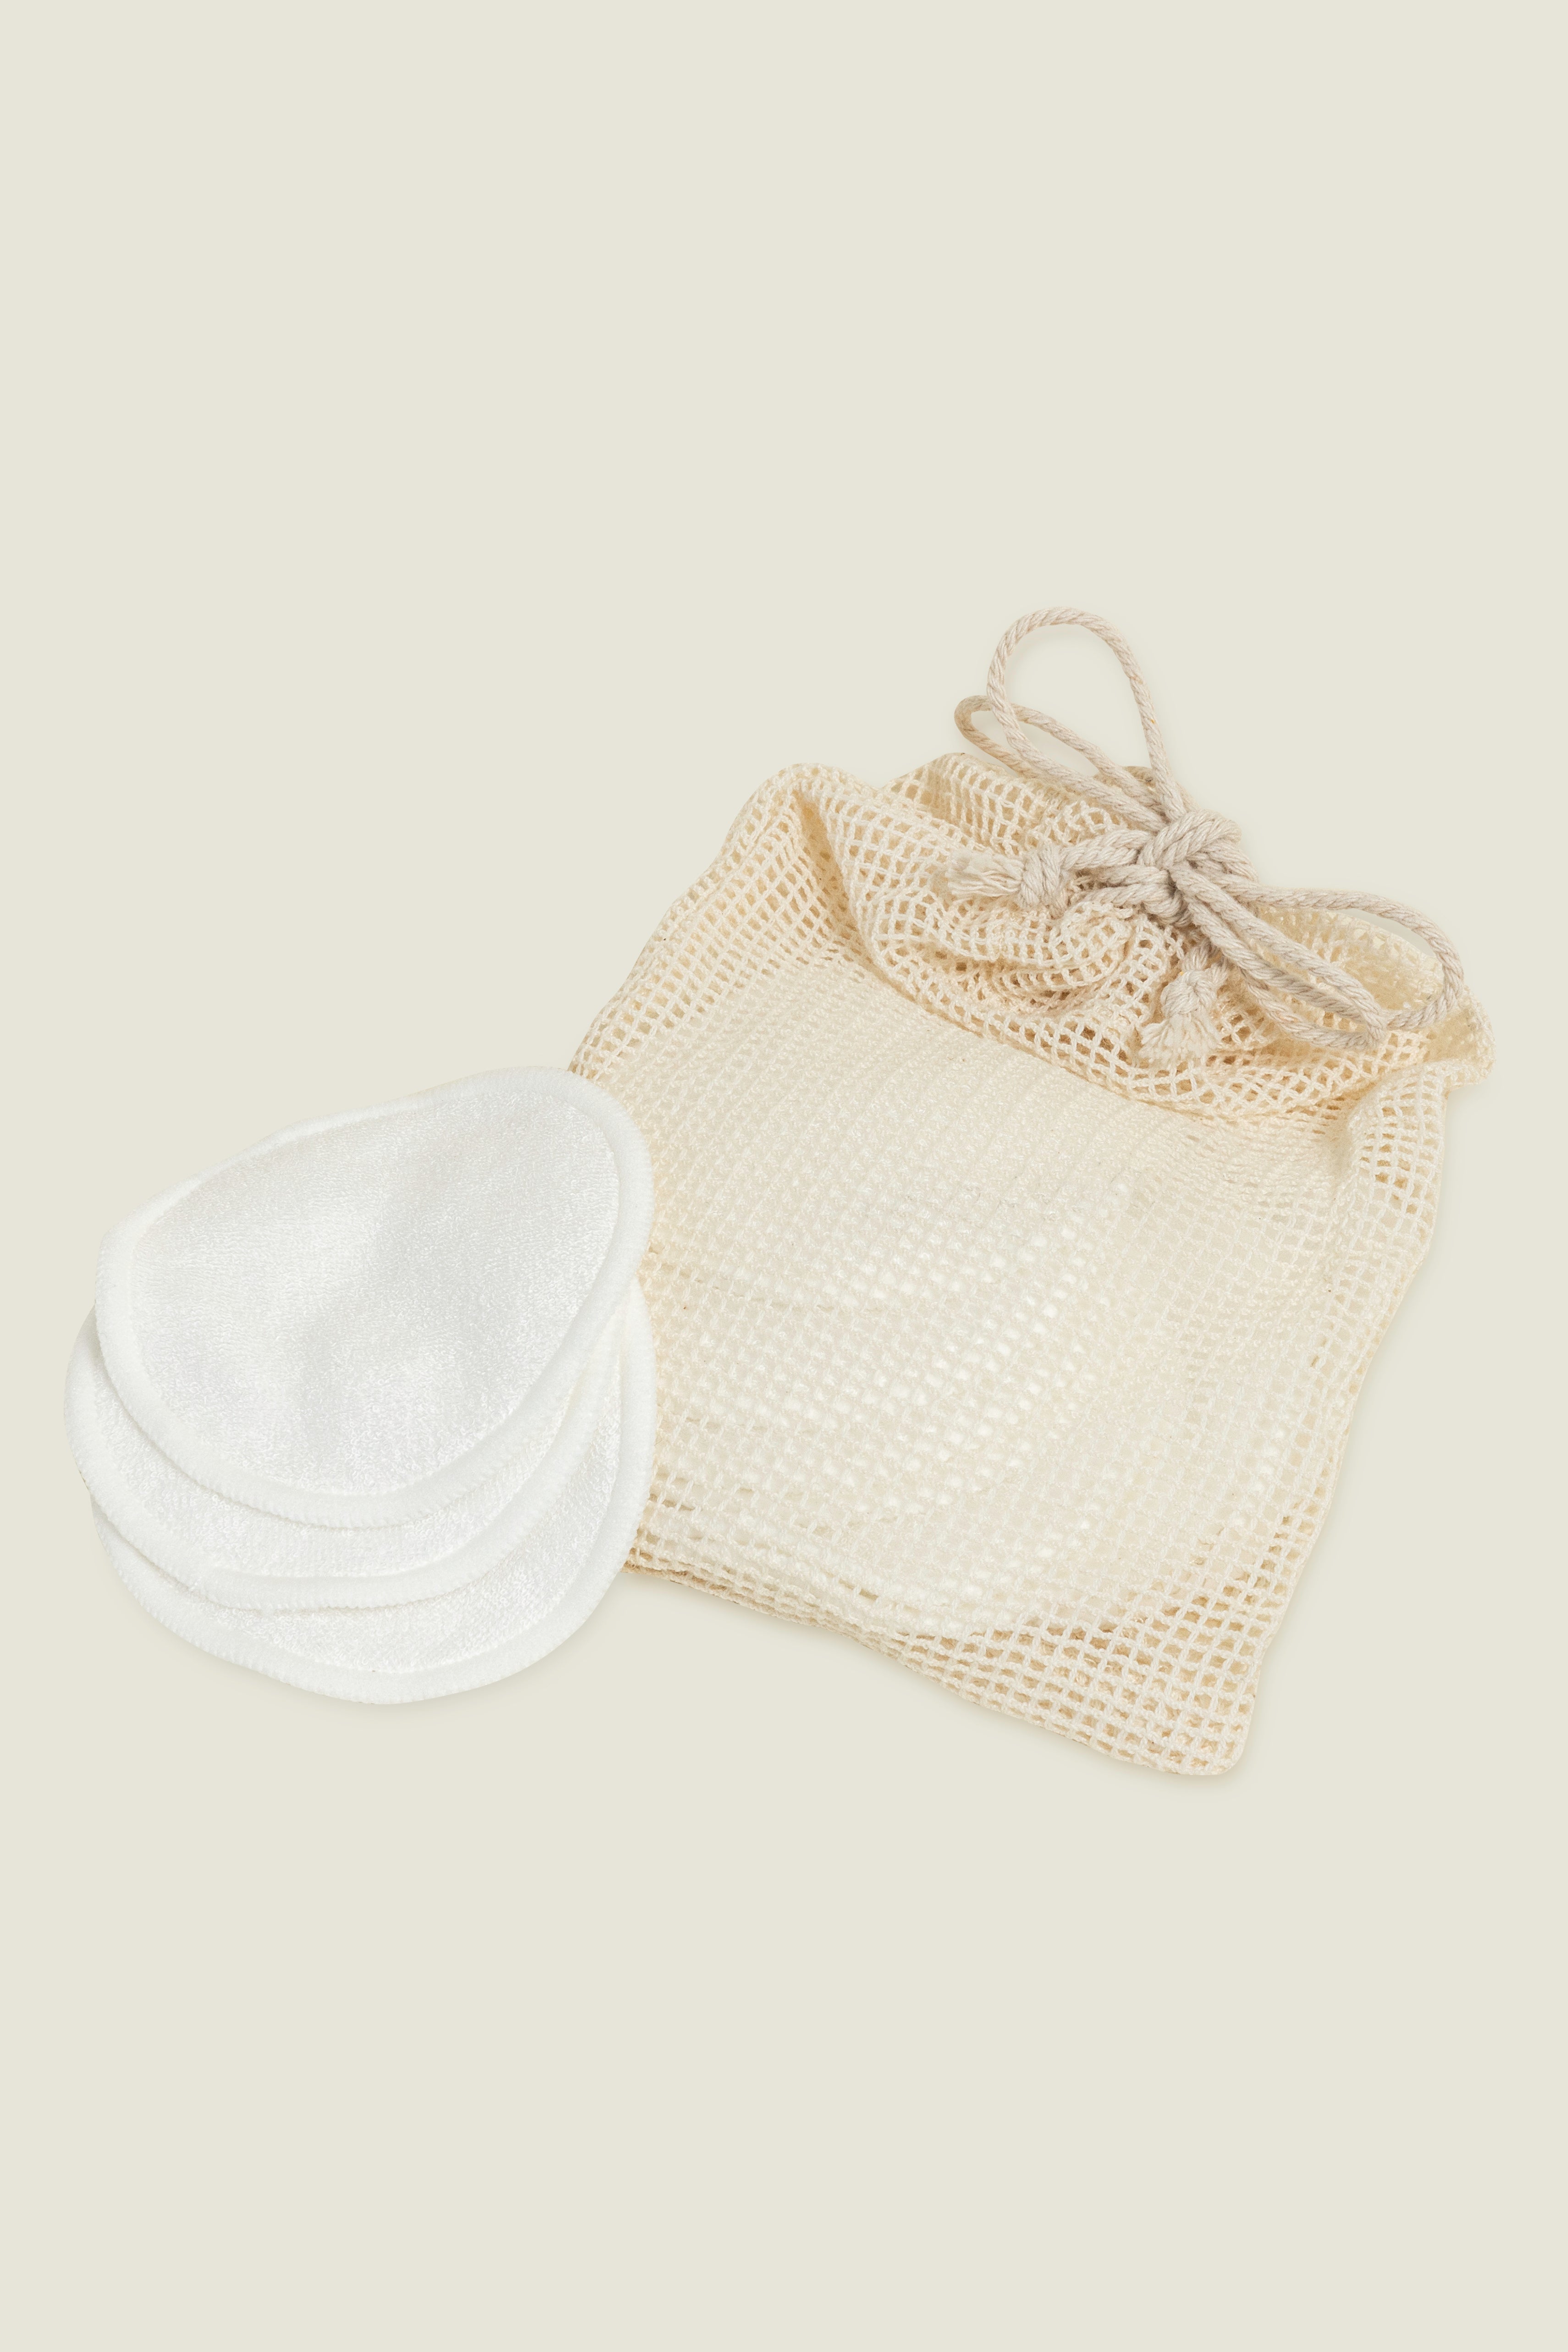 Reusable Bamboo Facial Cleansing Wipes